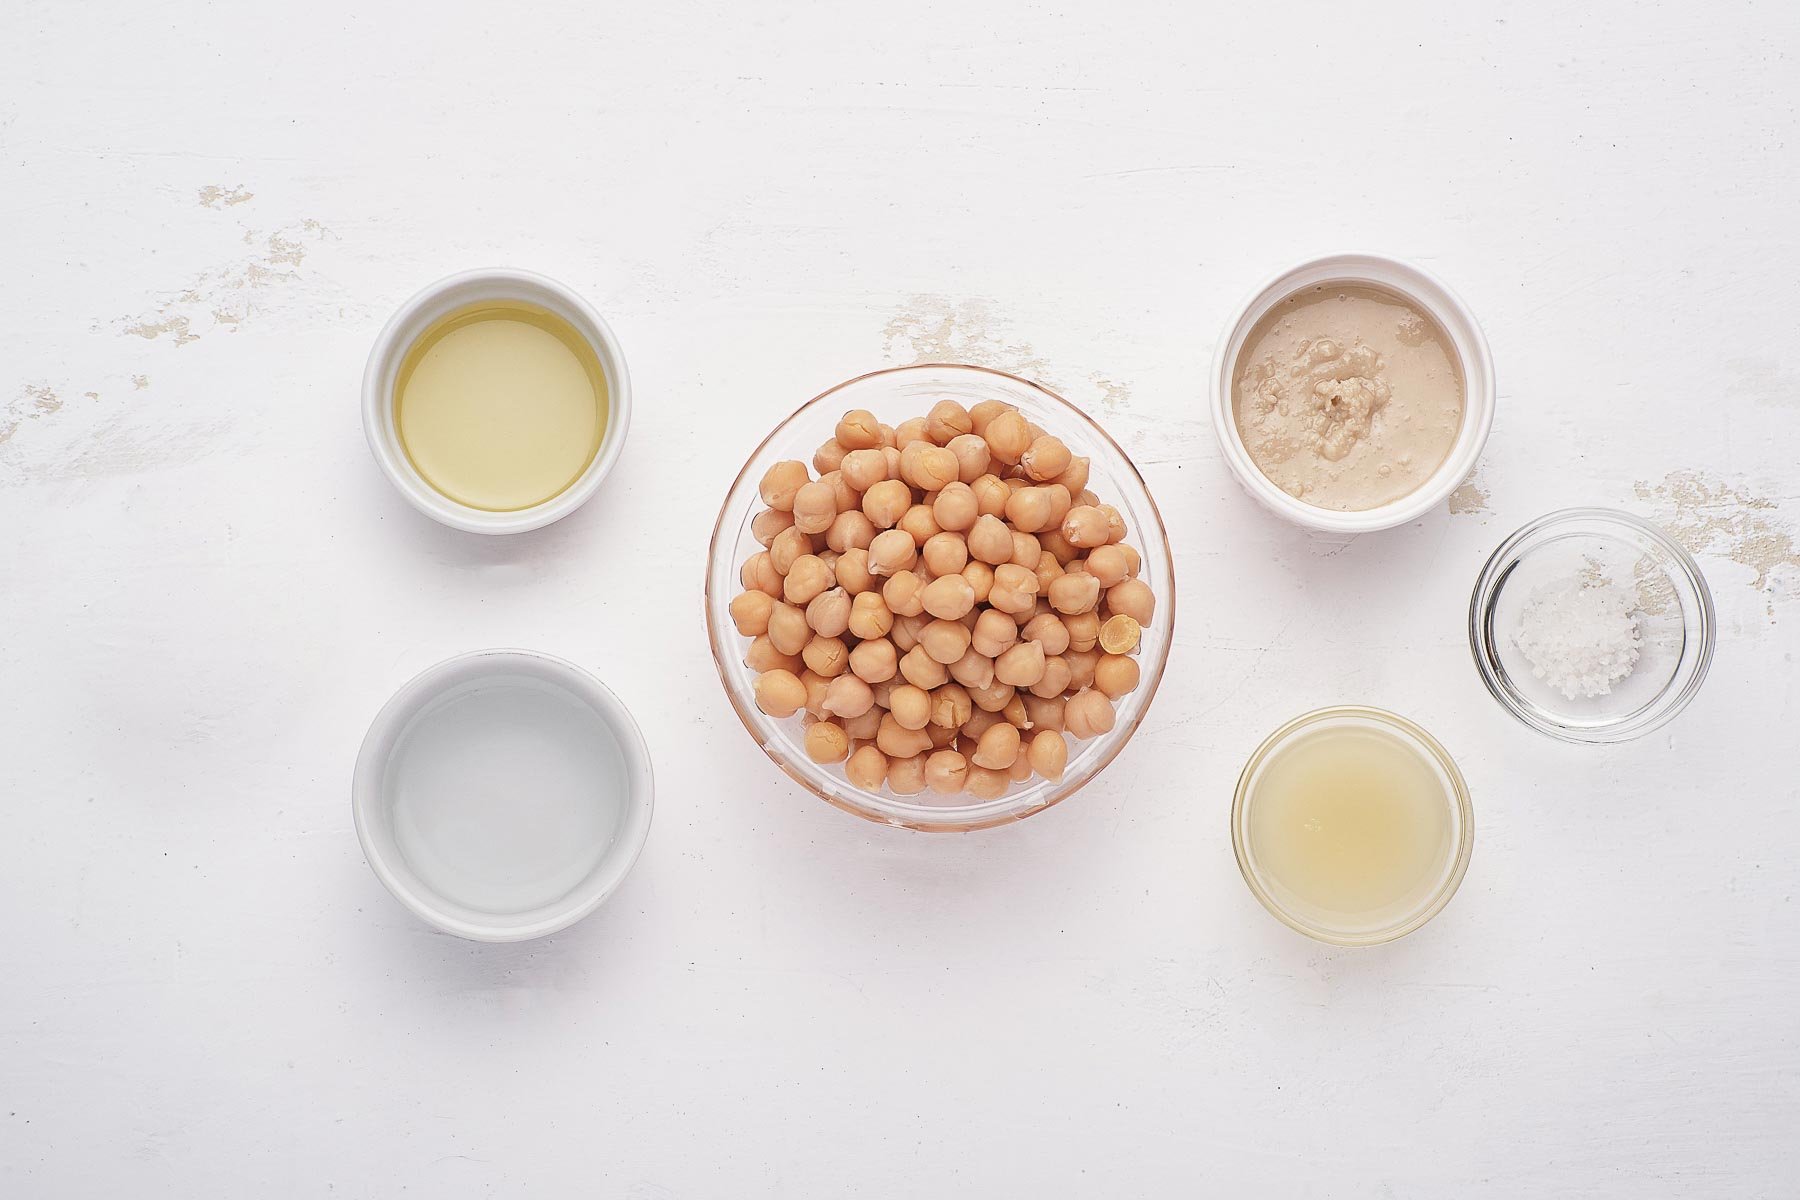 Beans, tahini, and lemon juice in small bowls on white table.